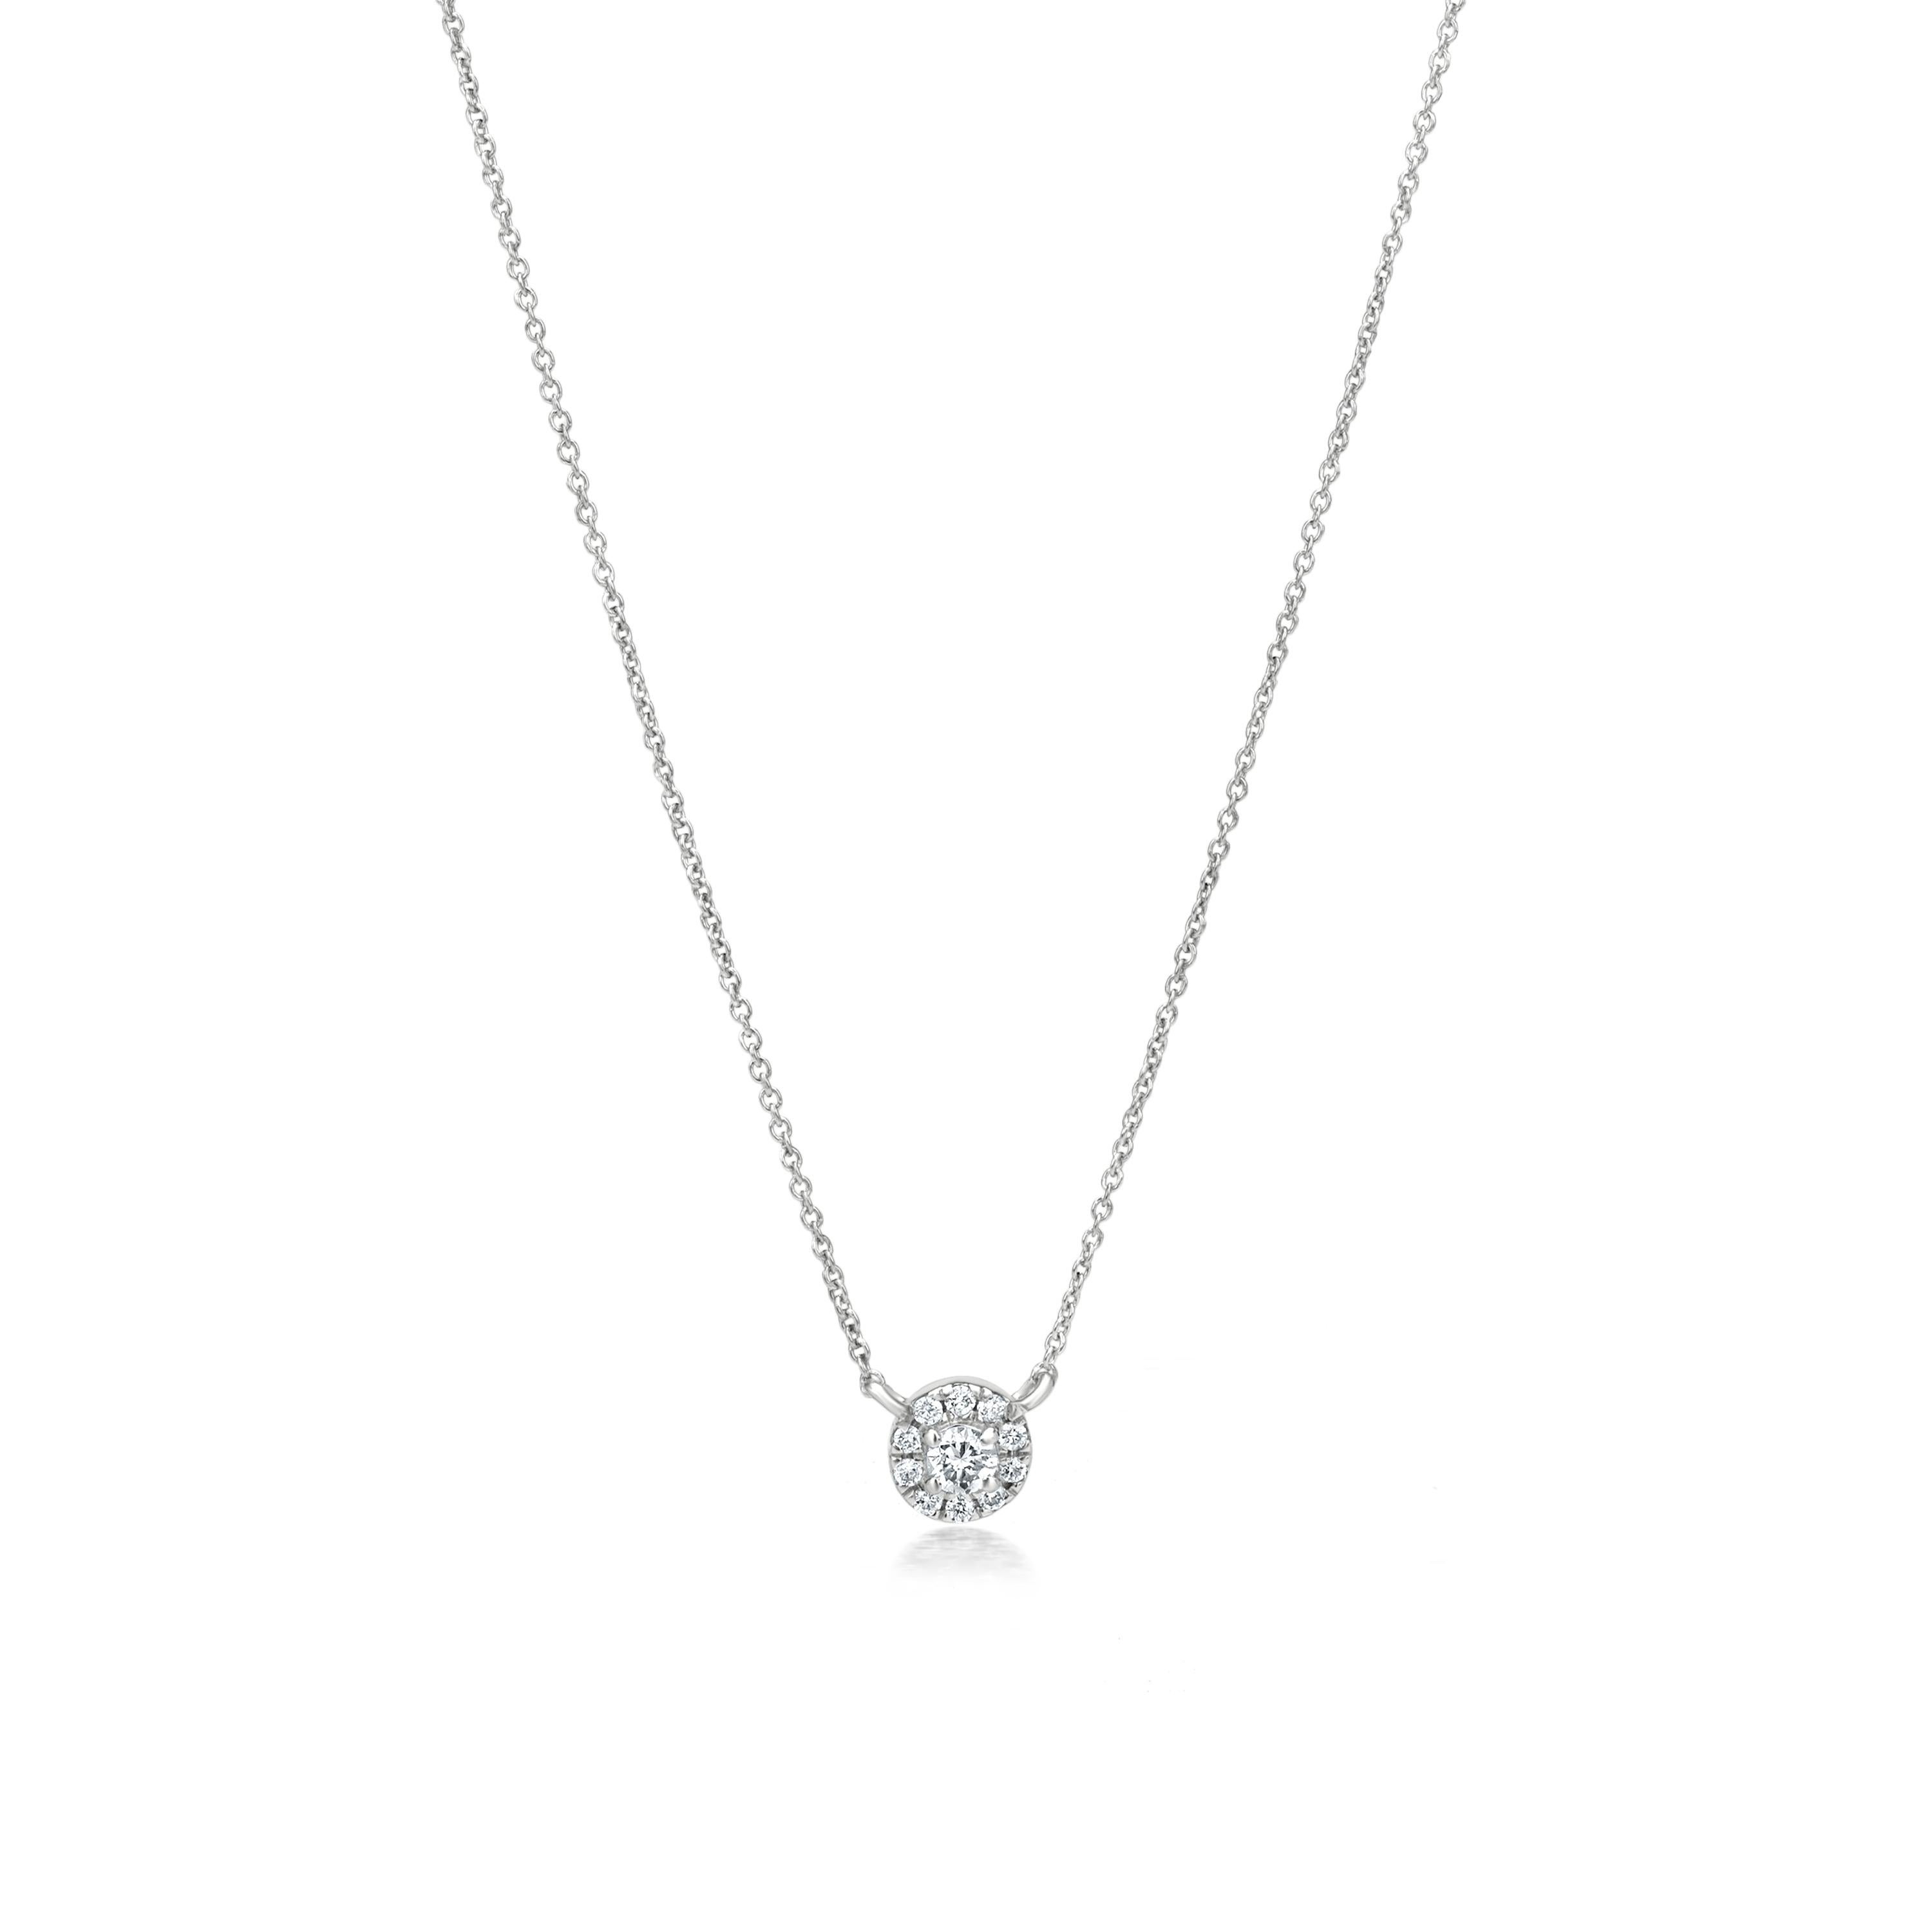 Grace your neckline with a Luxle diamond circle pendant. The circle is a universal sign that symbolizes eternity, life, wholeness, and perfection. Subtle yet pretty this circle pendant necklace is the new fashion statement. It is featured with 11